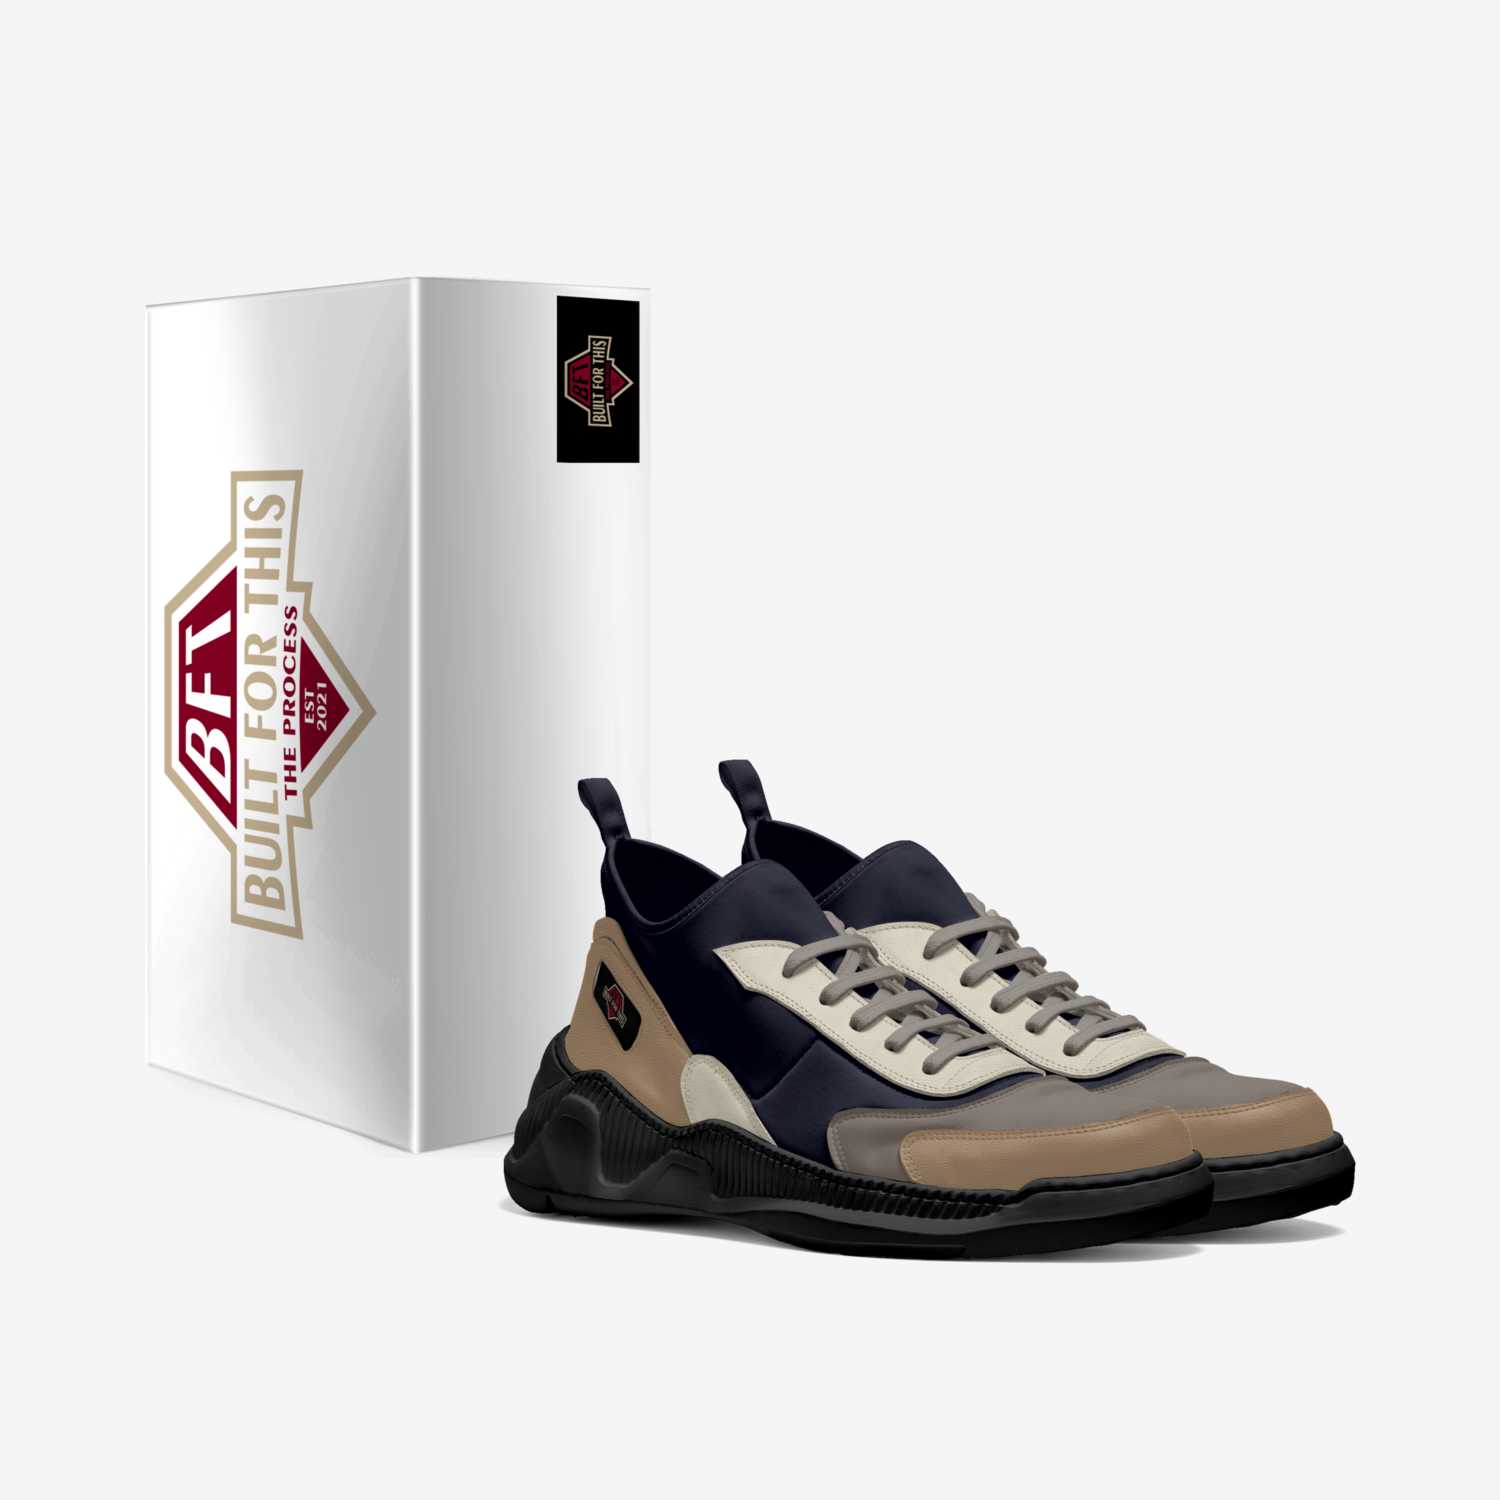 BFT ELITE V1 custom made in Italy shoes by Builtforthis 21 | Box view